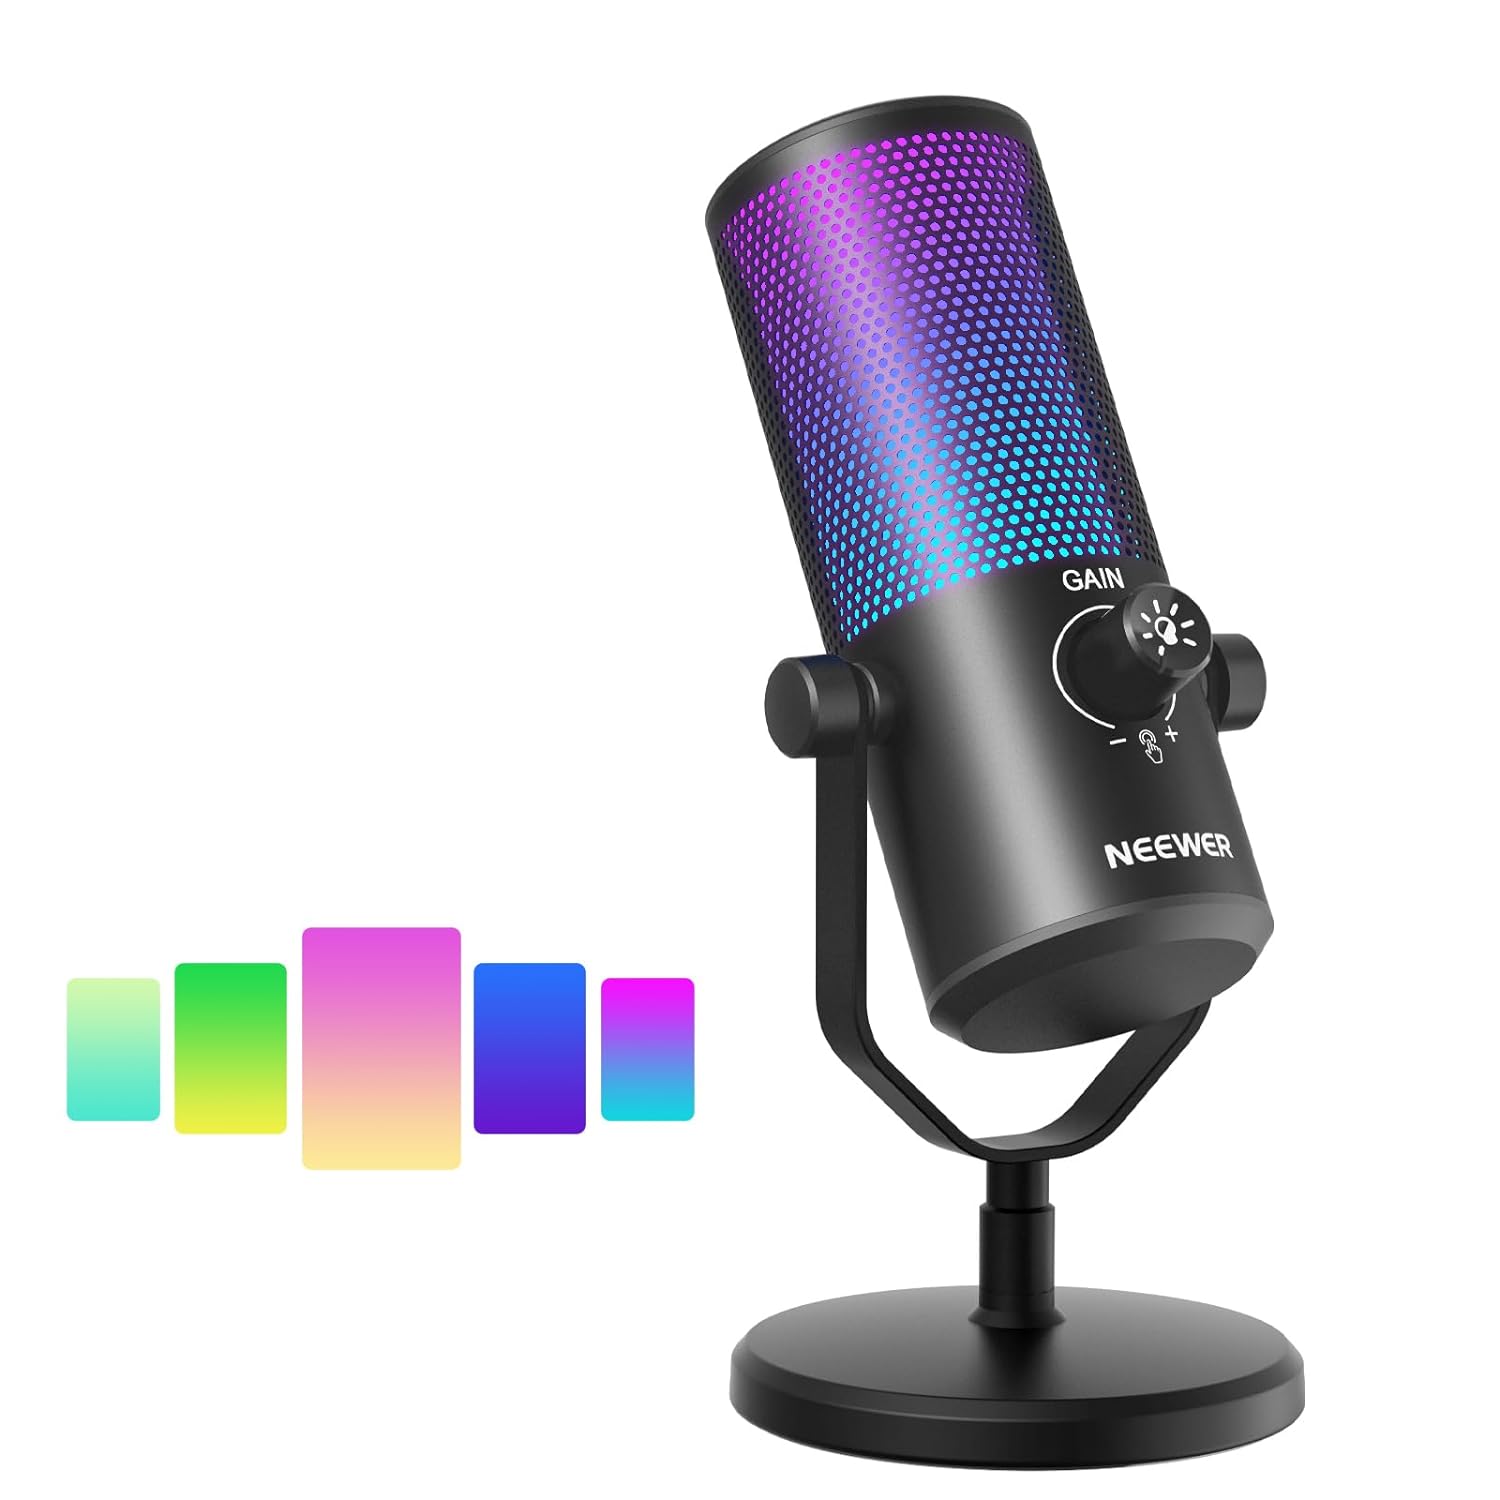 Neewer USB Gaming Microphone with RGB Light Effect, Plug & Play One Click Mute & Gain, for PC Mac PS4 PS5, Cardioid Condenser Mic for Twitch Streaming Game Podcasts, Online Chat and More, CM24